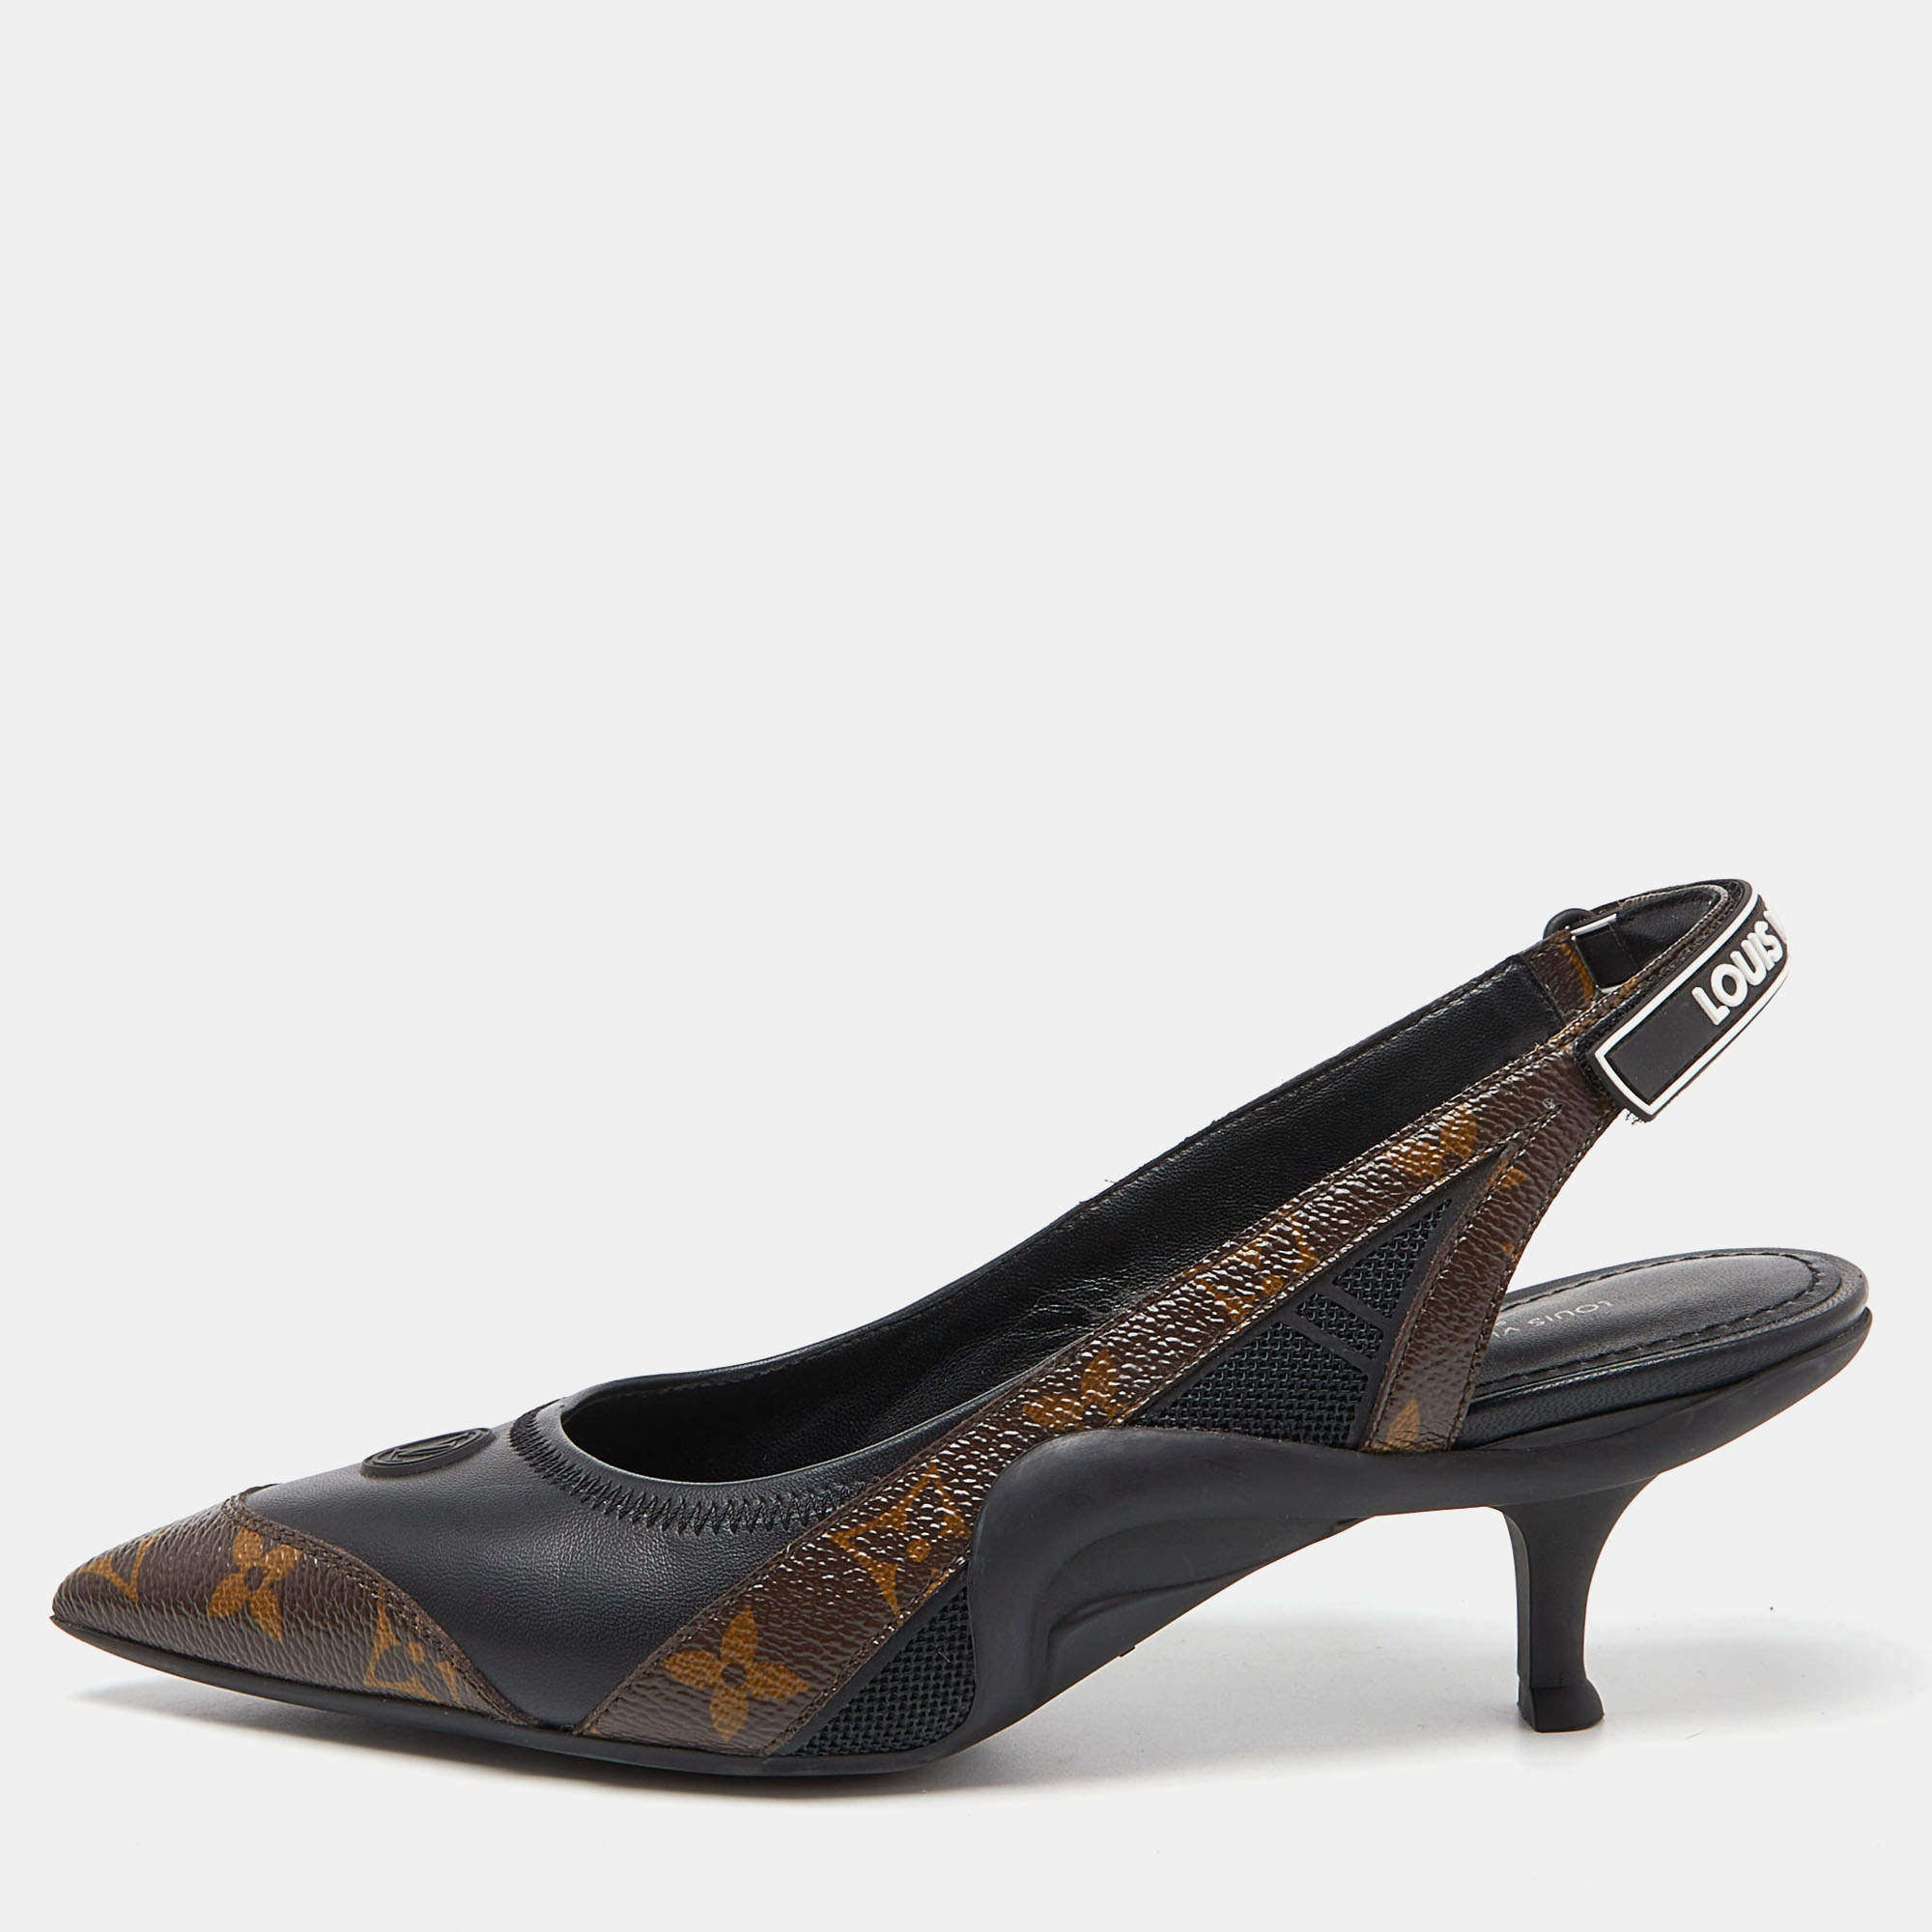 Louis Vuitton Archlight Monogram-printed Leather Slingback Pumps in White